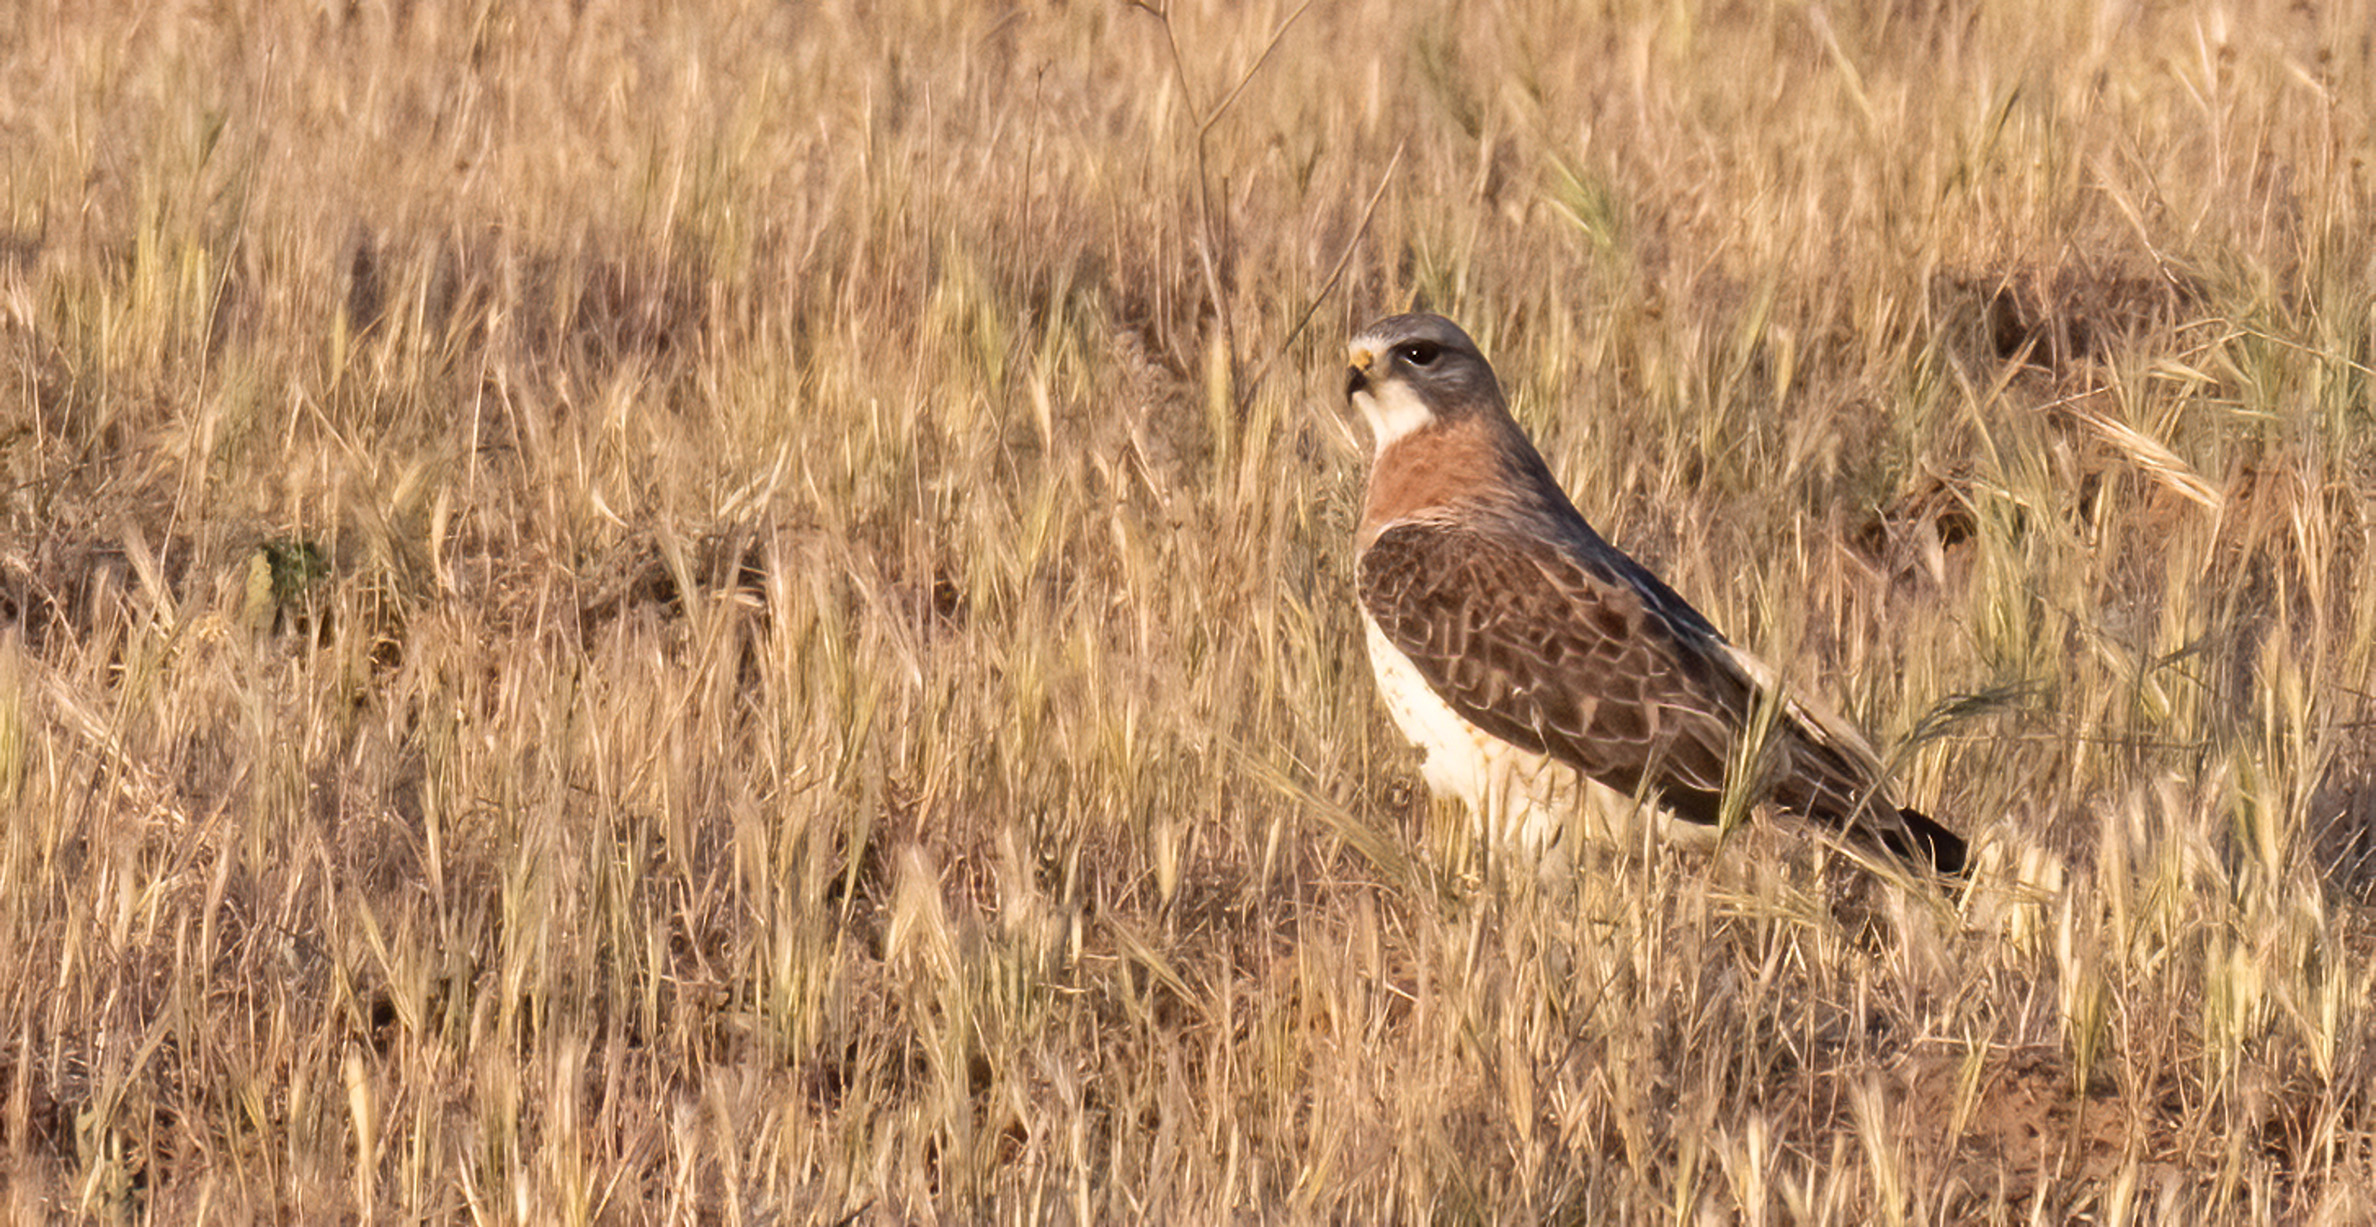 A hawk standing among dry brown grass. The hawk has brown wings, a rusty colored neck, and grey head.